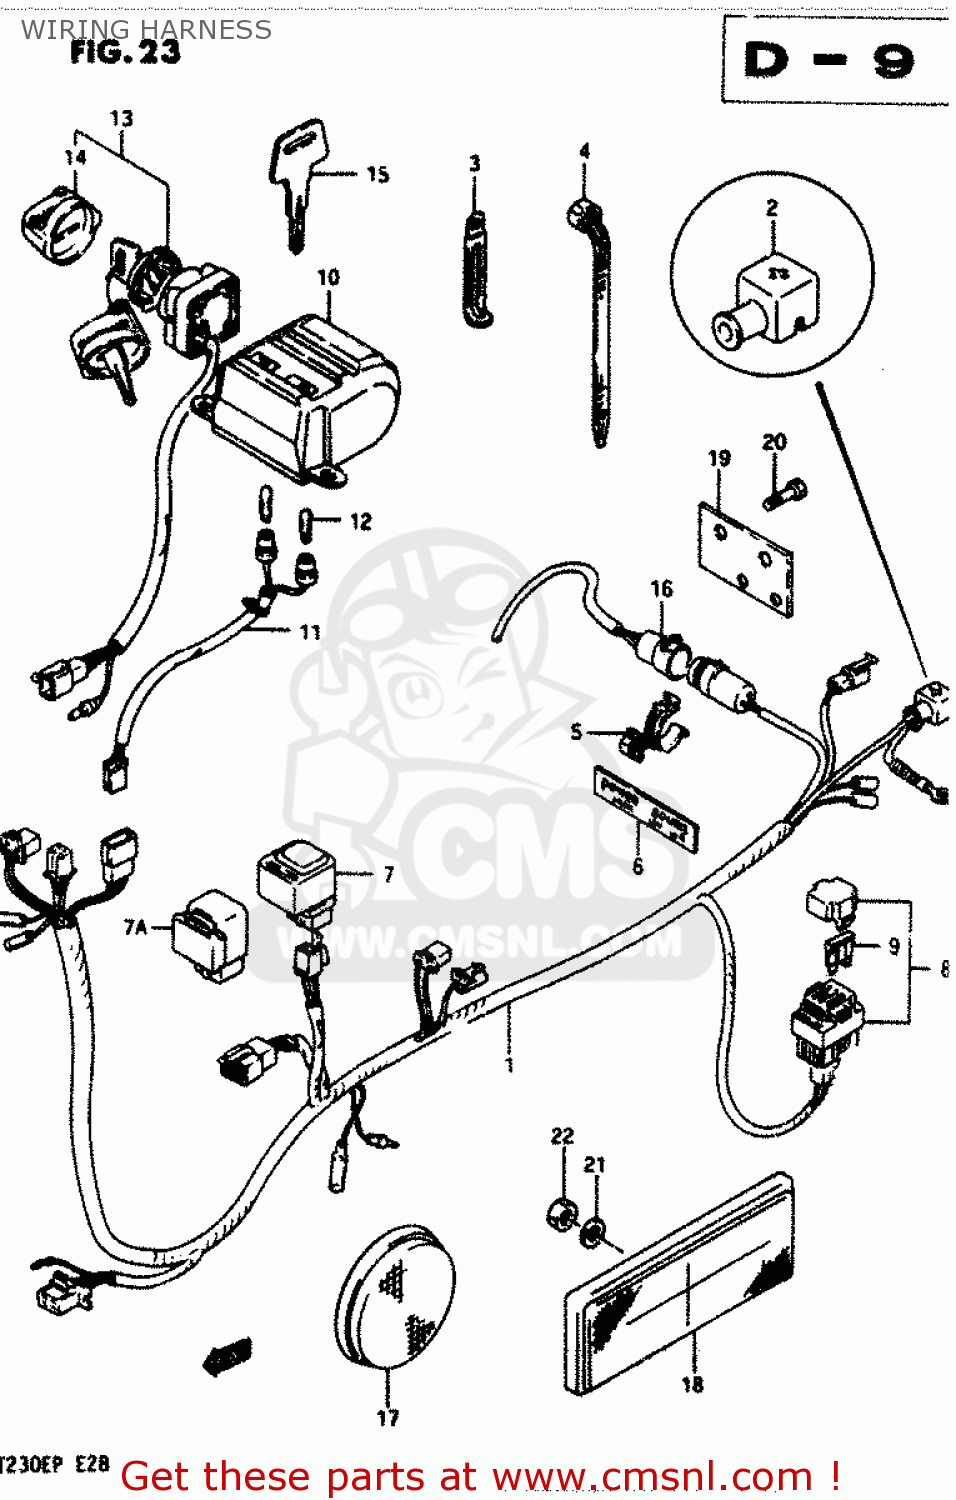 Wiring Diagram For A Ignition Coil For A 2005 Suzuki 400 Quad from images.cmsnl.com